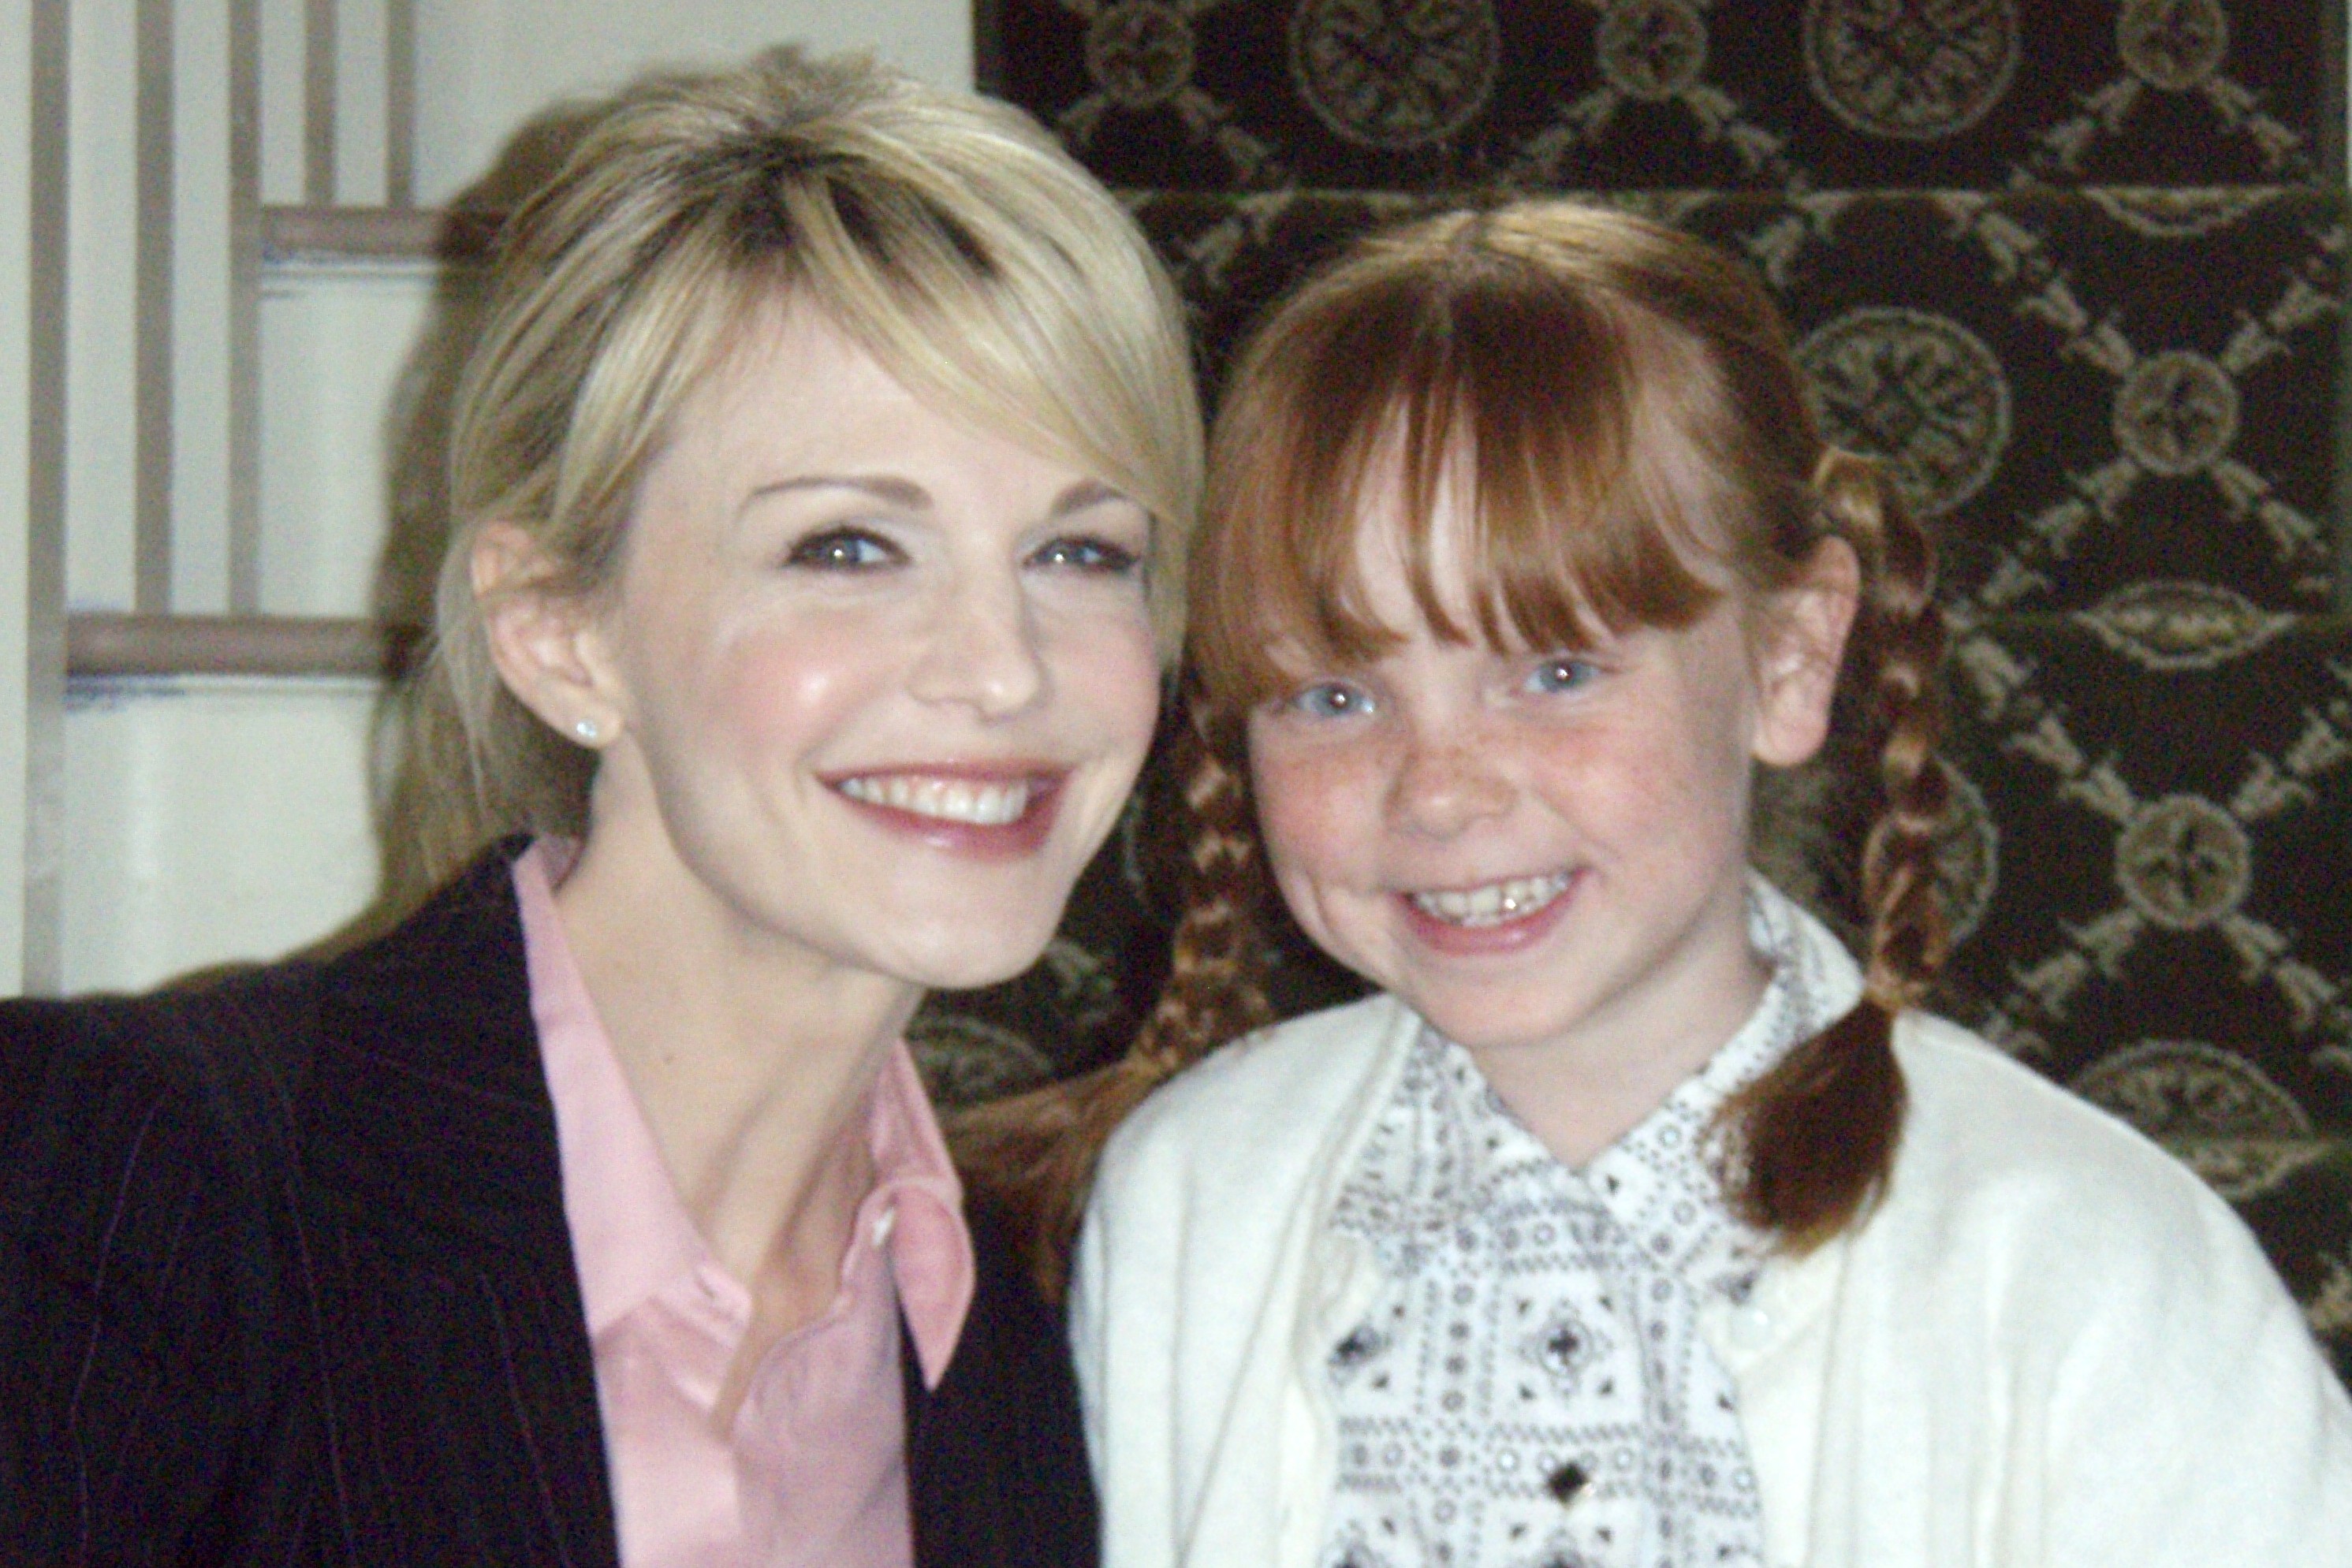 Kaleigh with Kathryn Morris, Detective Rush, on set in 